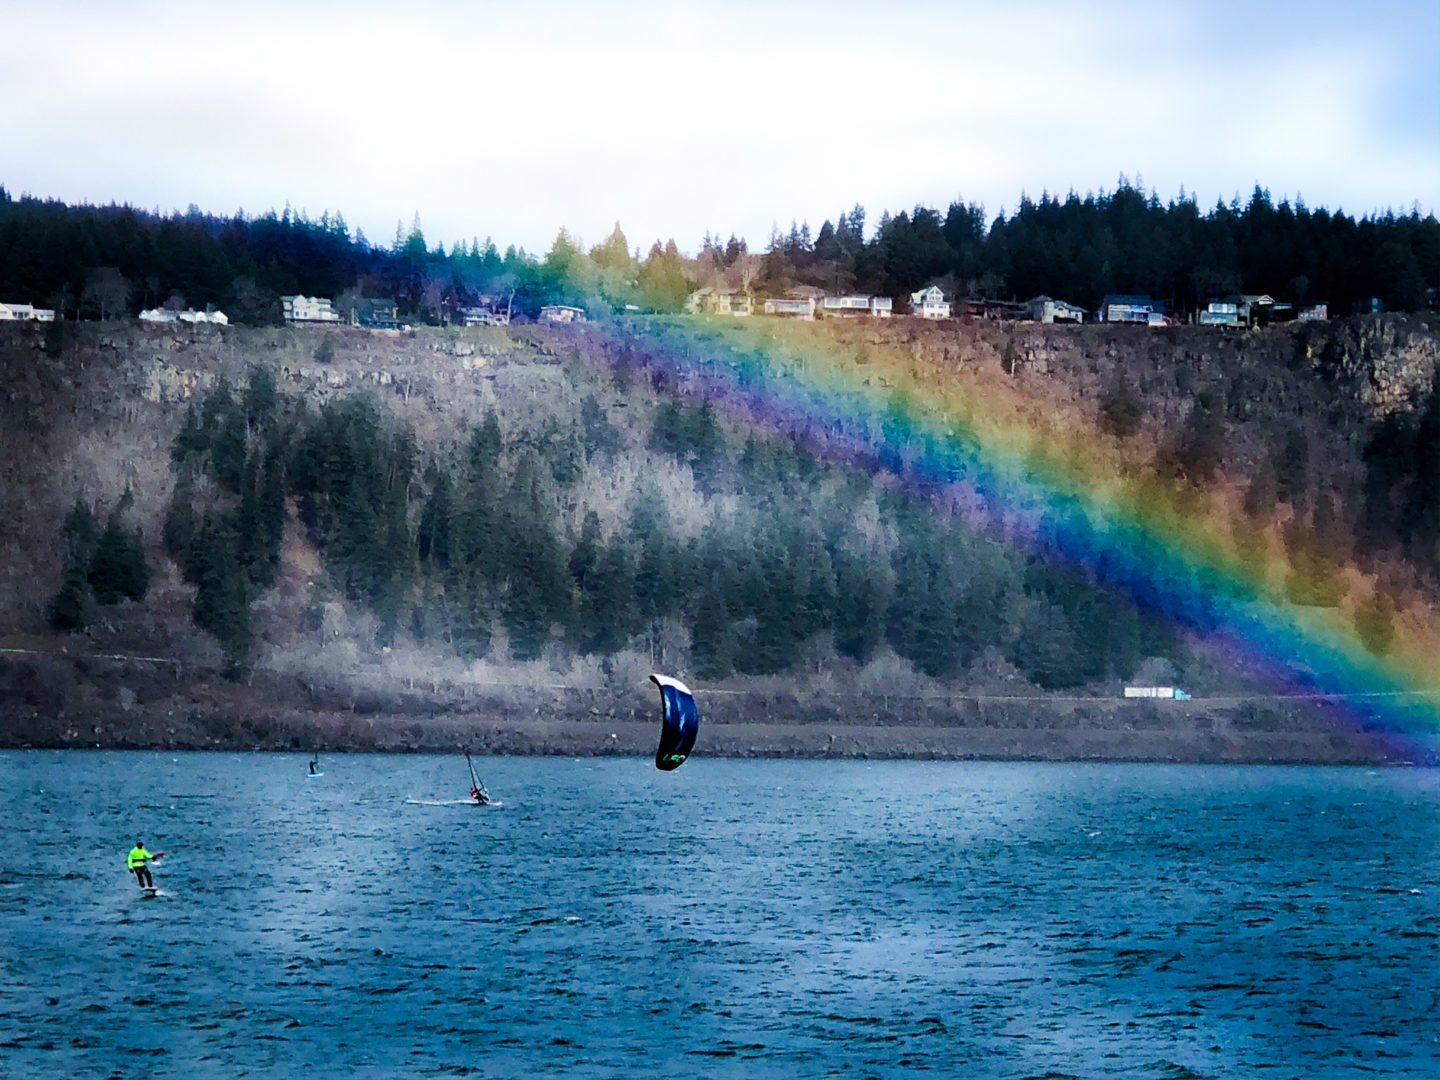 Kiteboarding on the Columbia River under a Rainbow